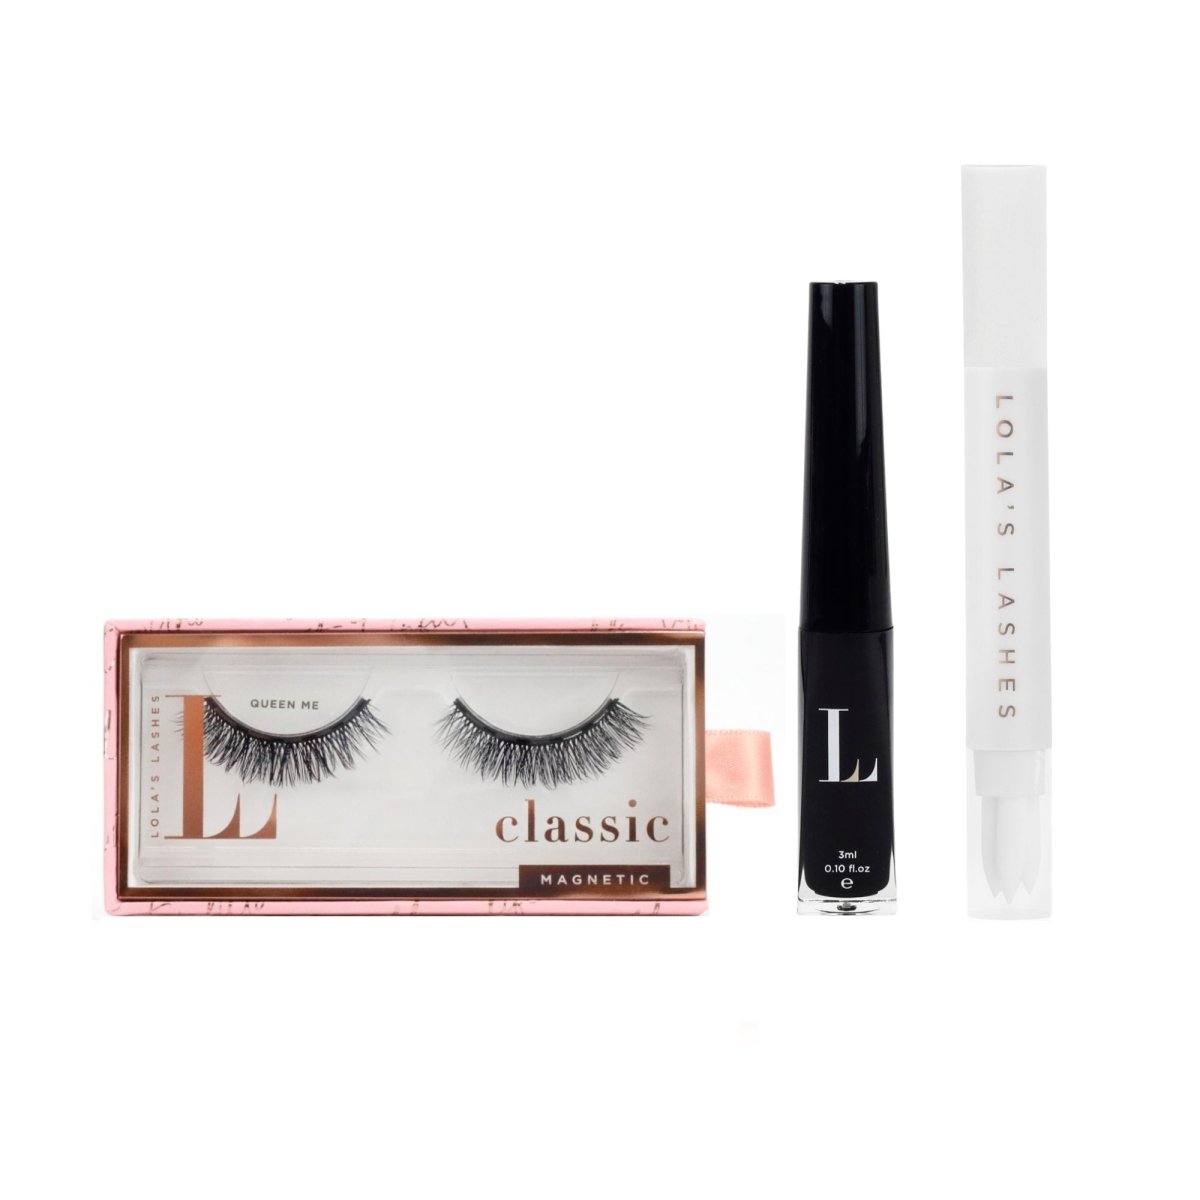 Queen Me Russian Hybrid Magnetic Lash & Liner Set - Lola's Lashes